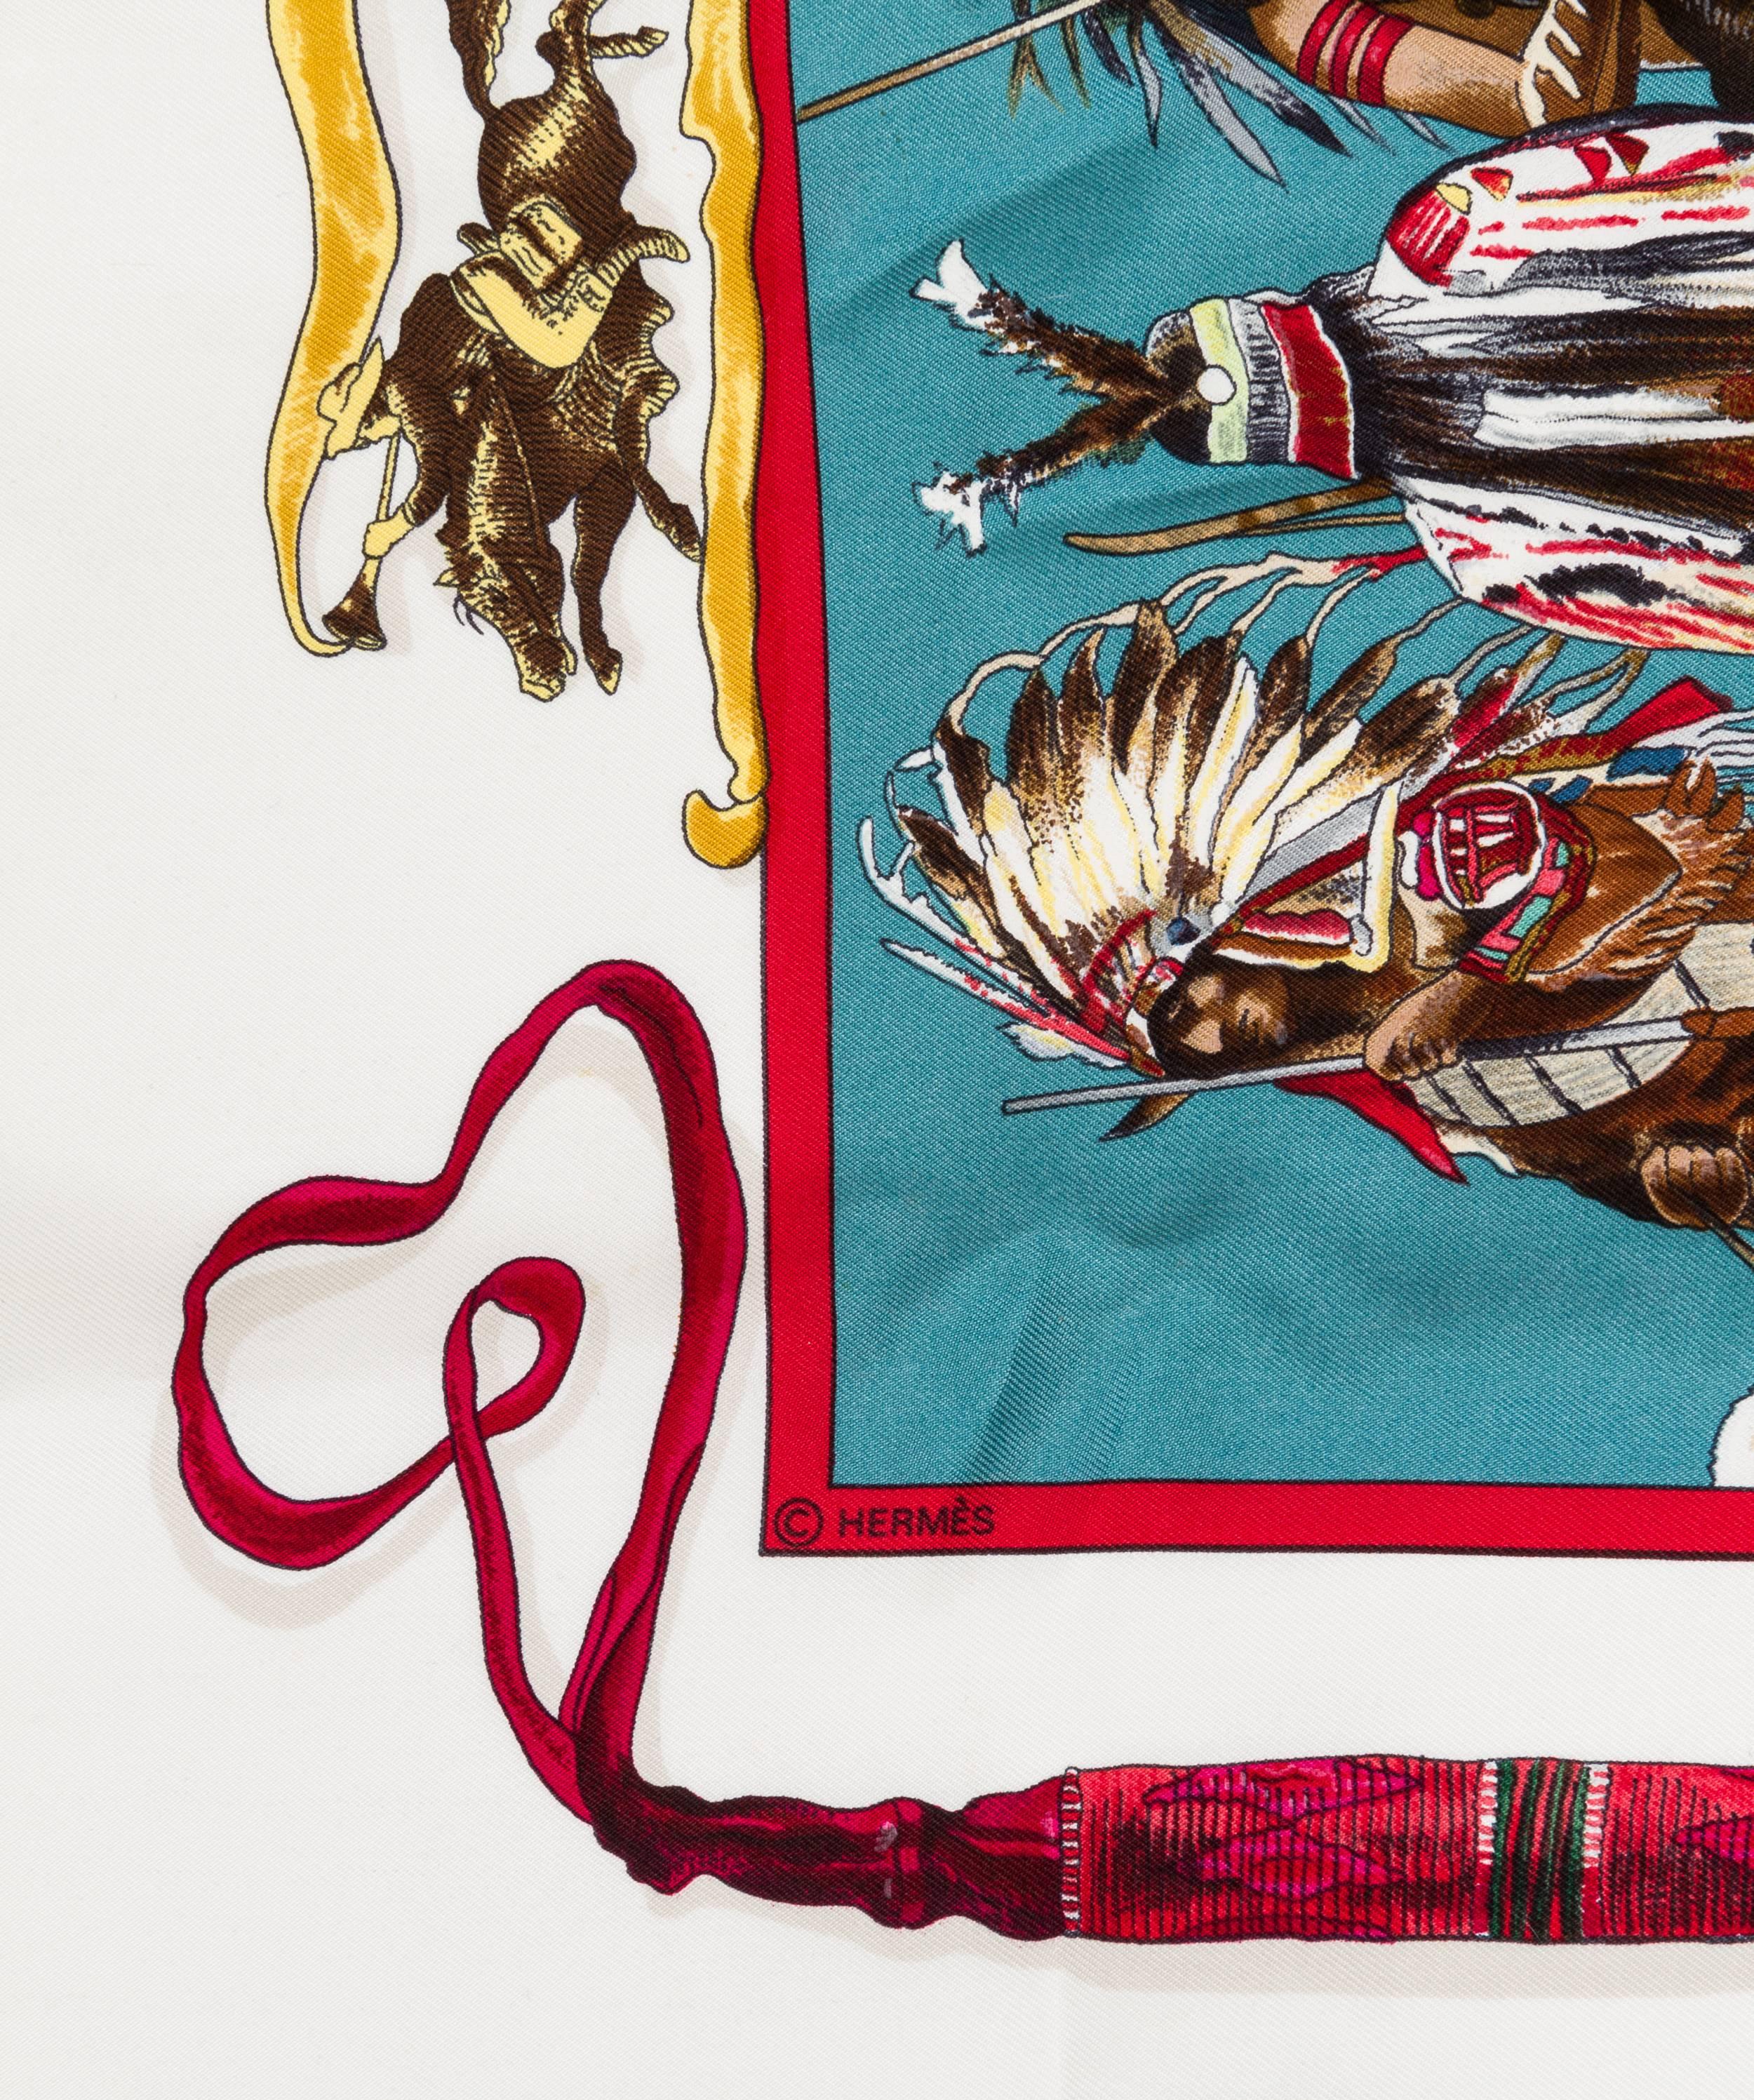 Hermès highly collectible Pony Express 100% silk twill scarf designed by US artist, Kermit Oliver. Issued in 1993. Ornate detail. Hand rolled edges. Comes in box.